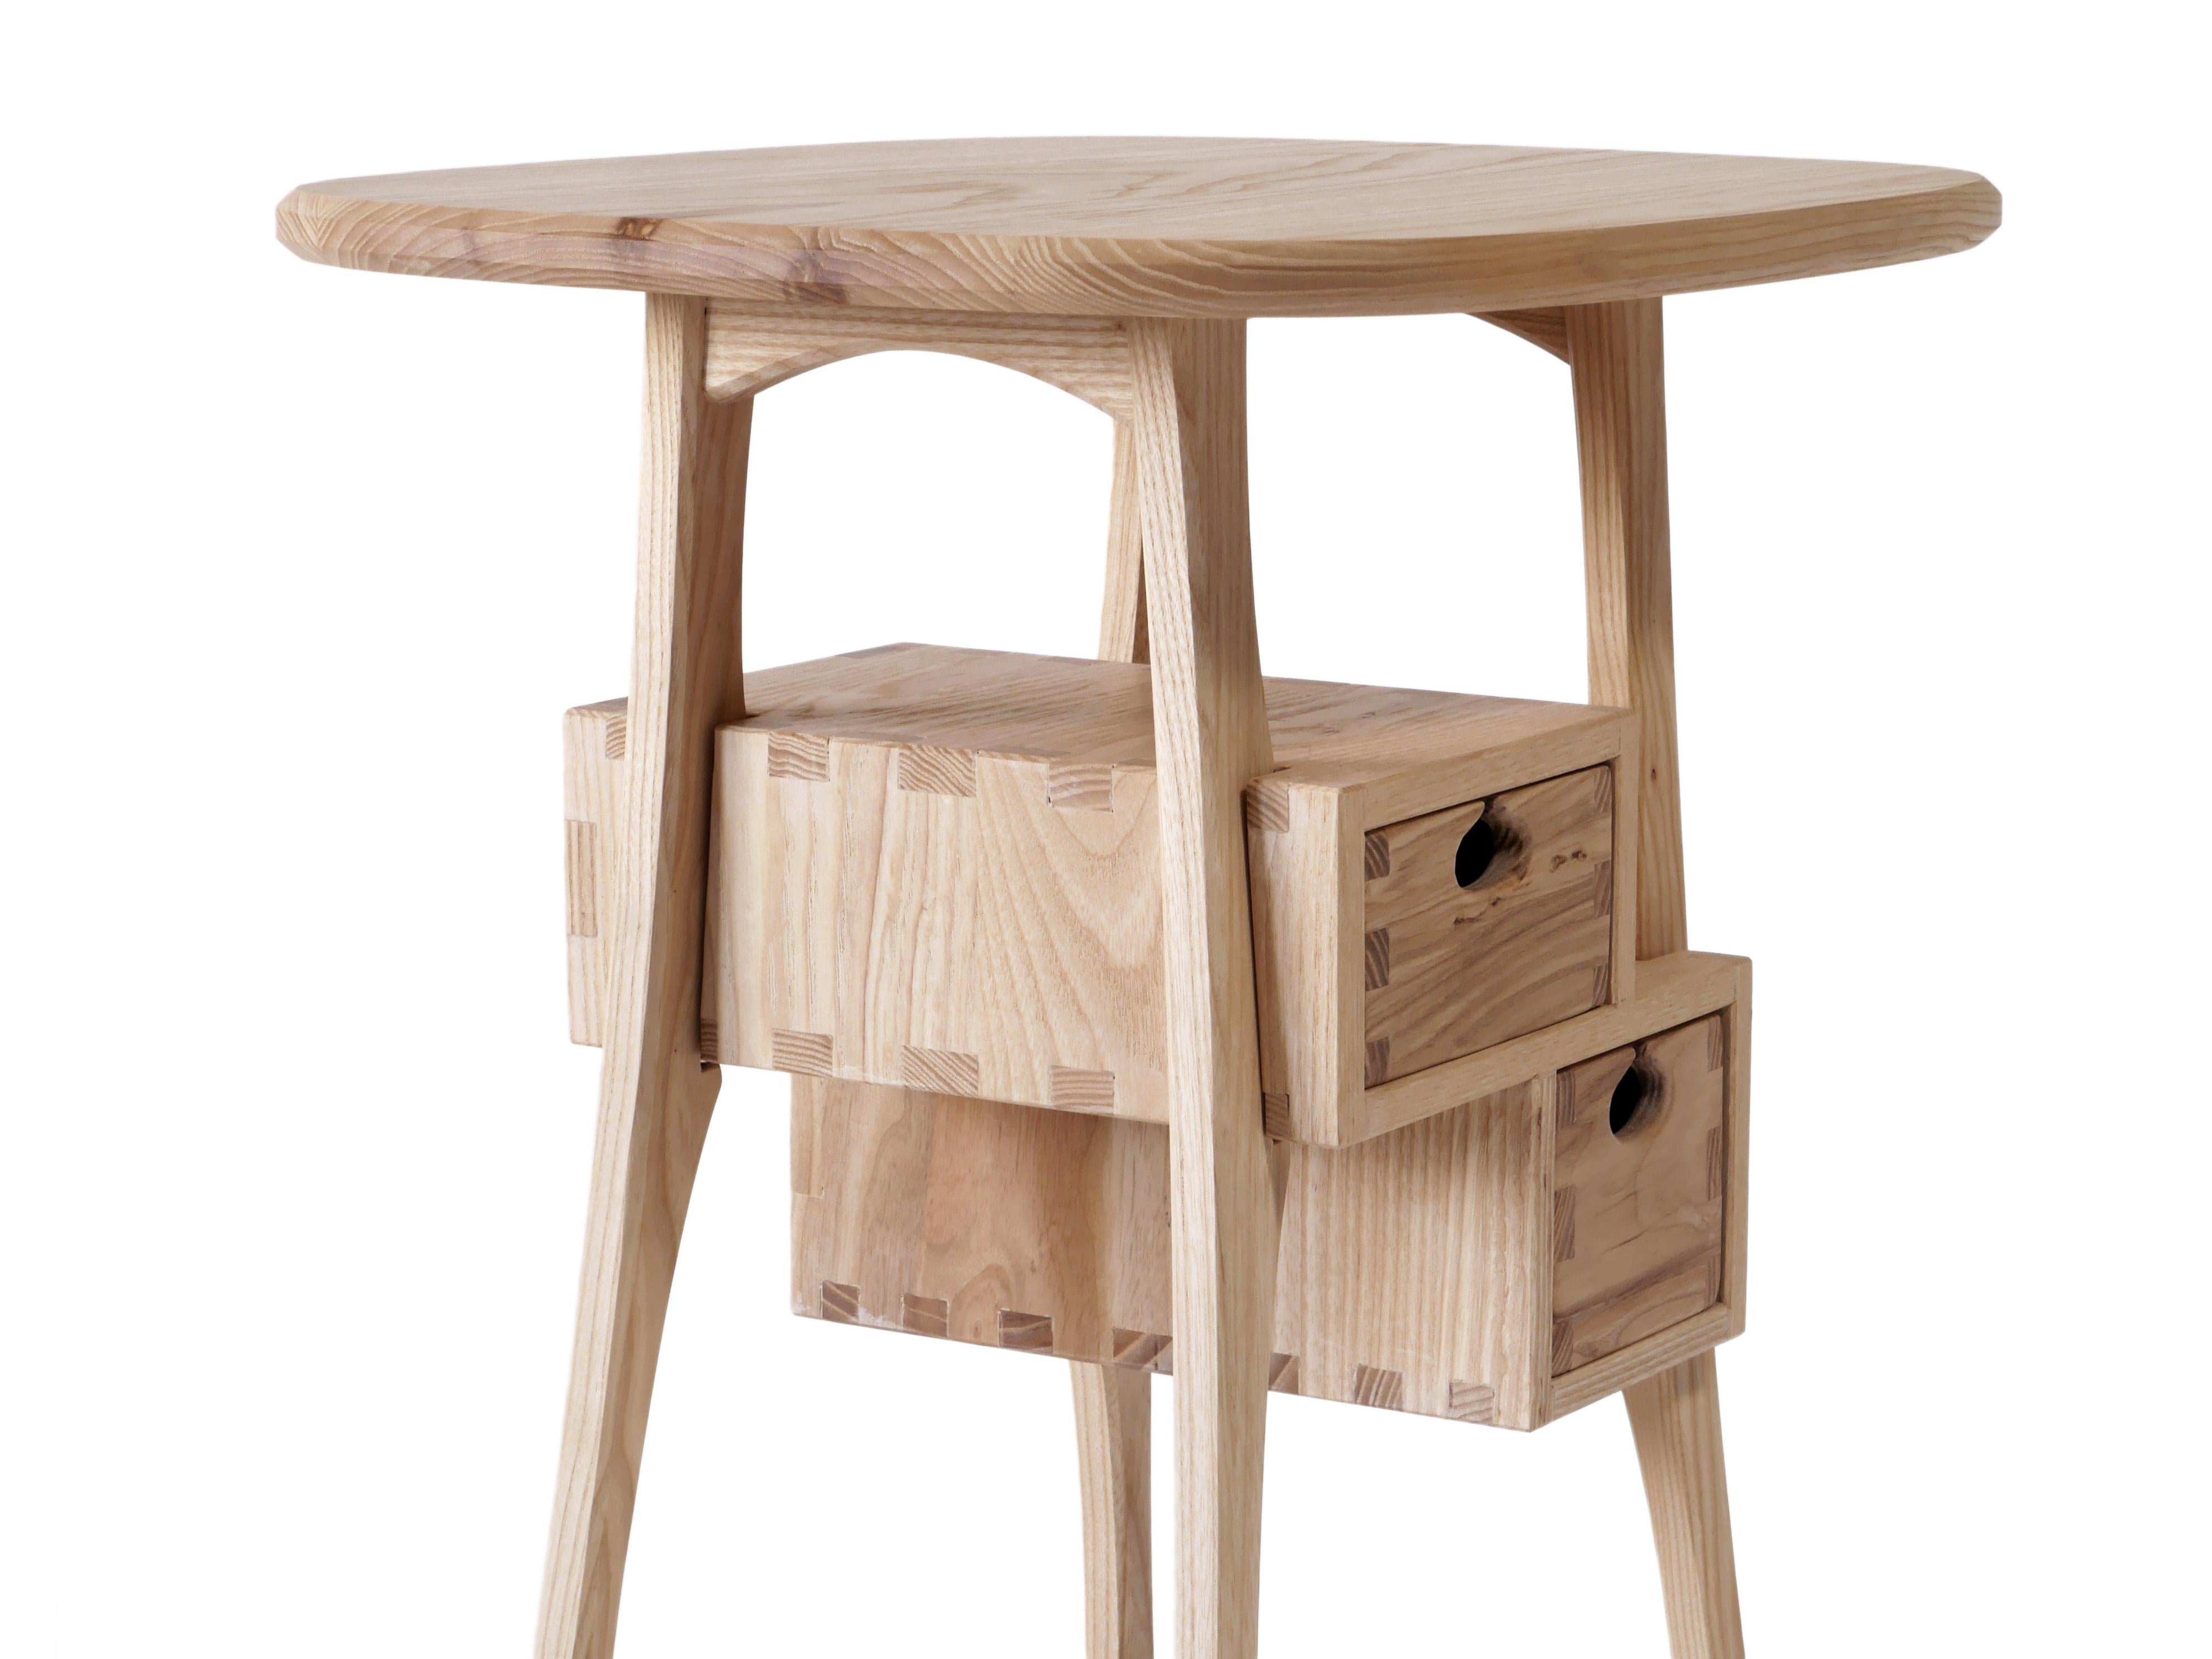 We have one of these in stock, Available to ship now.

The playful Haar side table is built out of solid white ash hardwood and has two drawers mounted on wooden runners in traditional drawer boxes. It is built with exposed joinery that has been